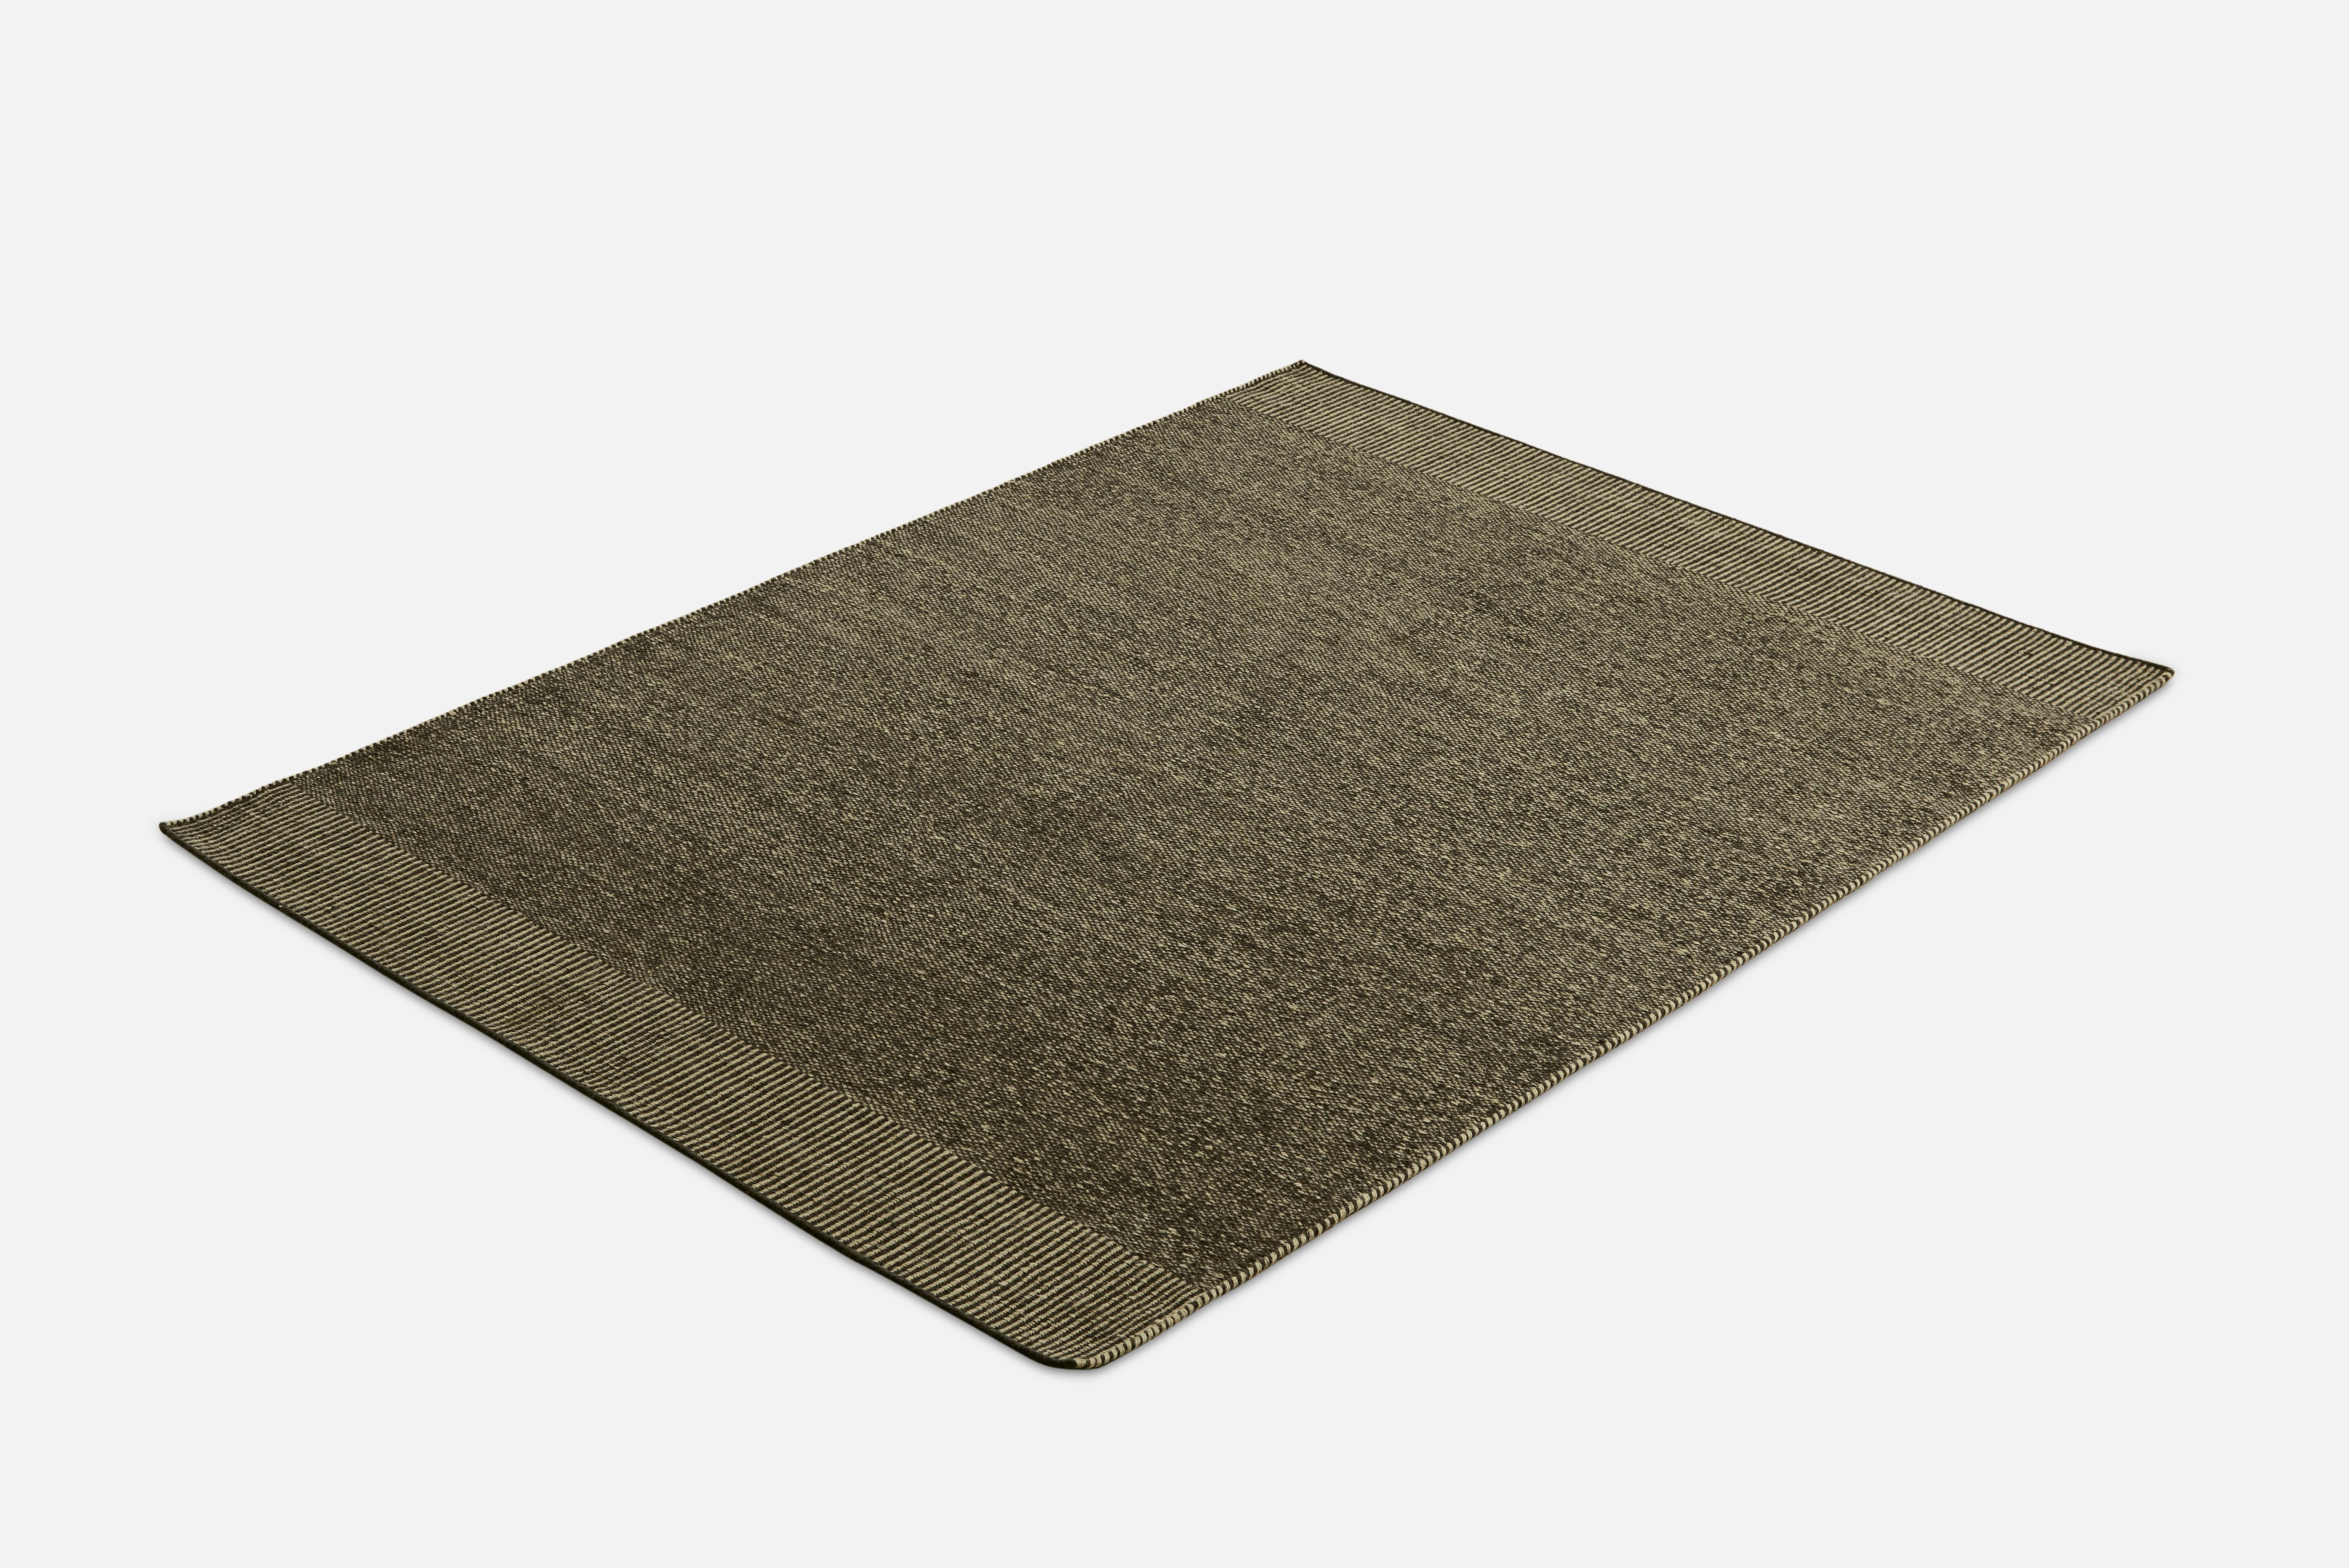 Large green Rombo rug by Studio MLR
Materials: 65% wool, 35% jute.
Dimensions: W 170 x L 240 cm
Available in 3 sizes: W 90 x L 140, W 170 x L 240, W 75 x L 200 cm.
Available in grey, moss green and rust.

Rombo is characterised by the